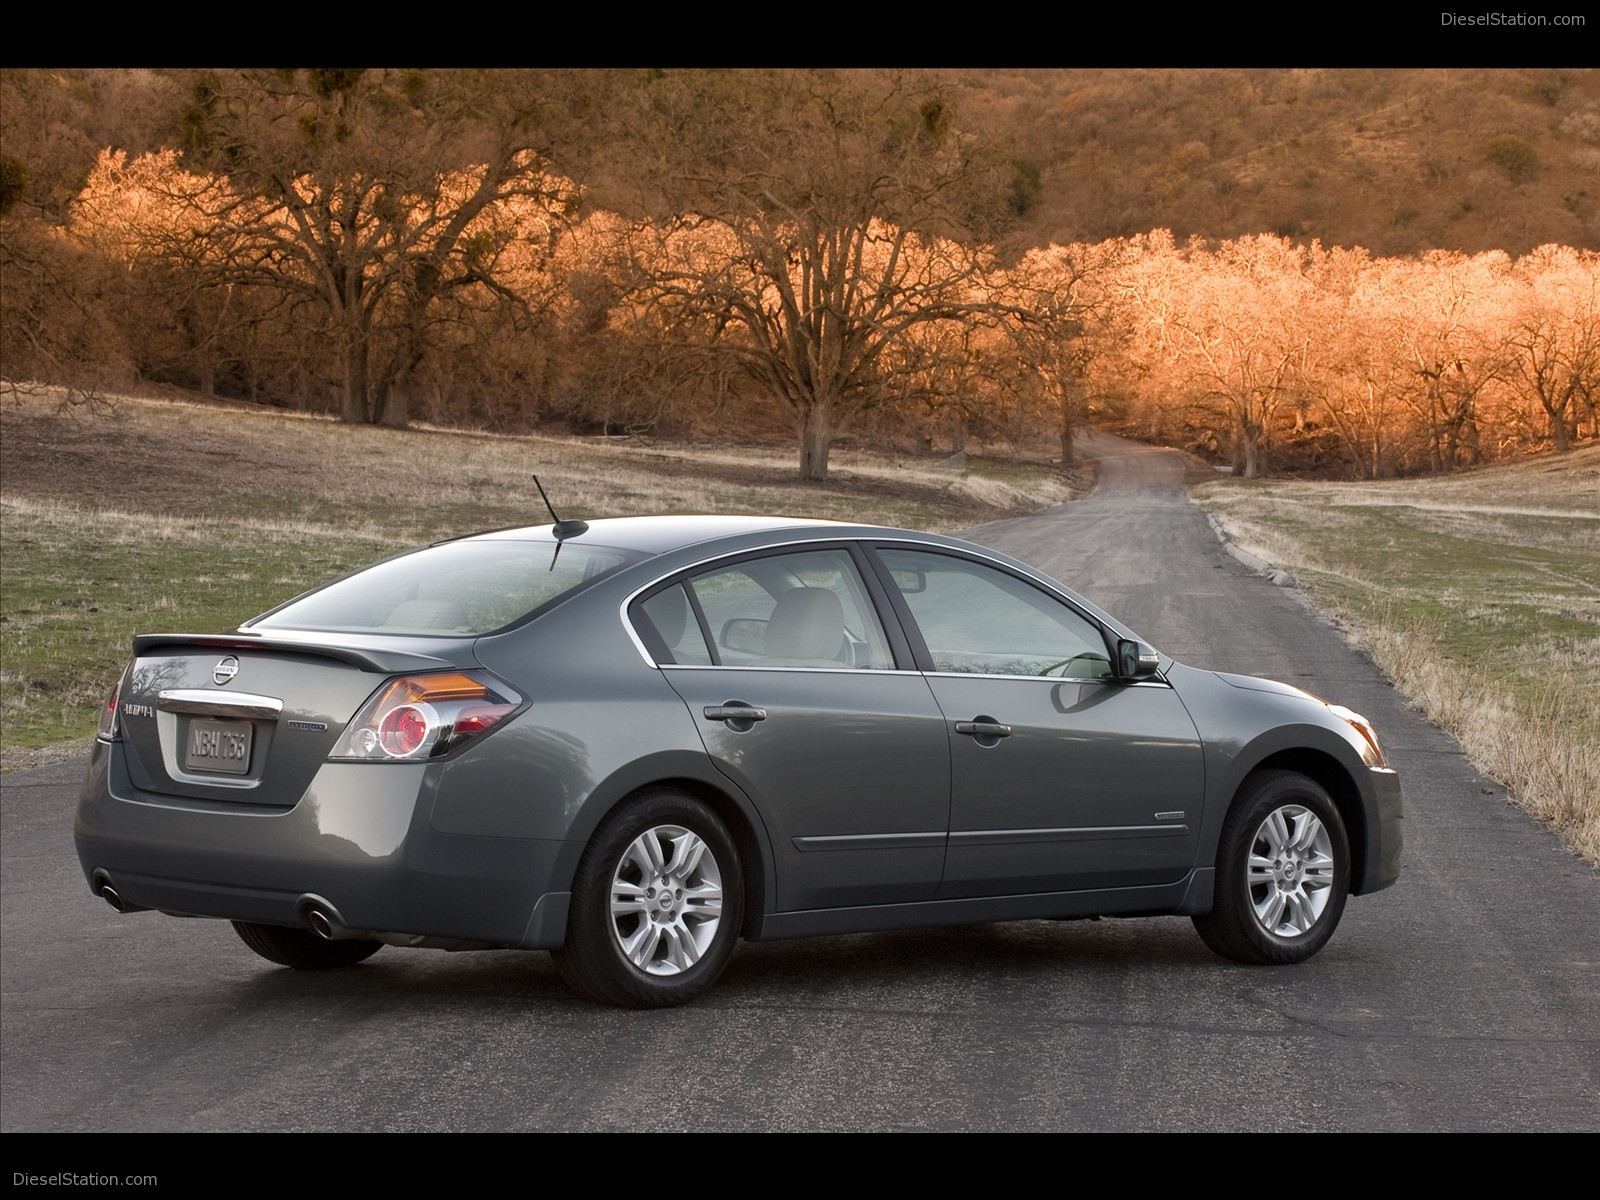 ... 2015 Nissan Altima- review, price, coupe, hybrid.